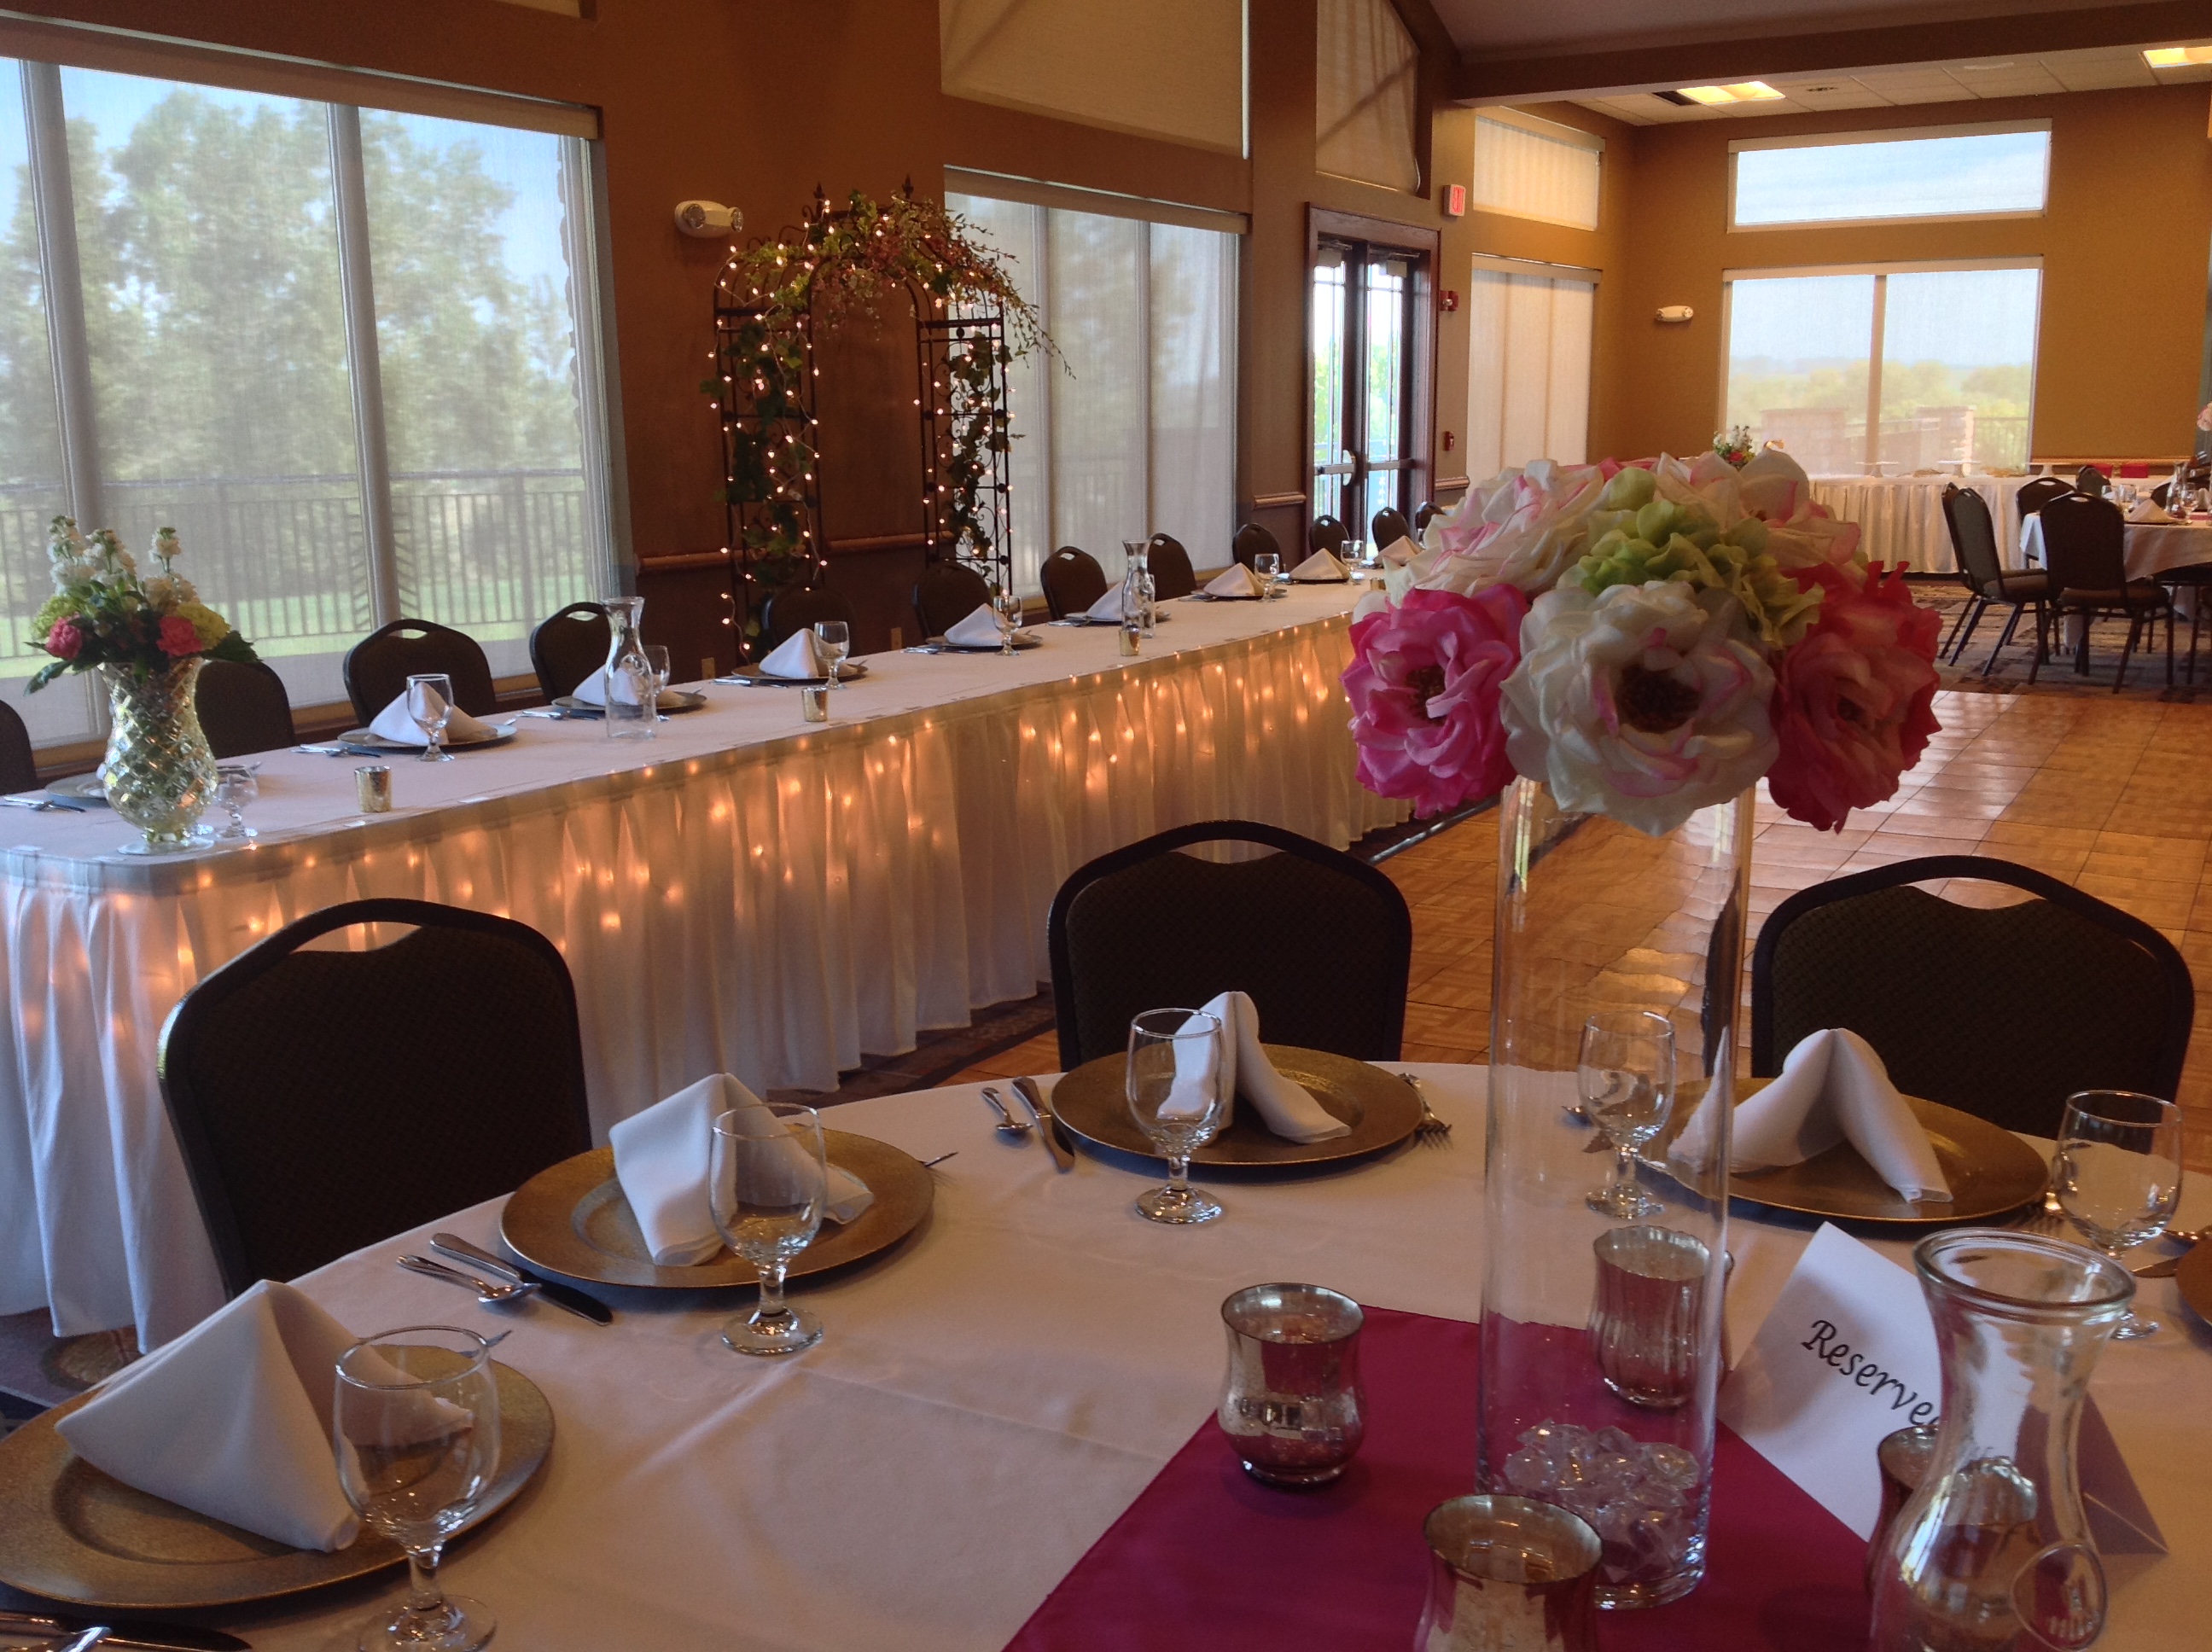 Flower table setting and decorated head table at Boulders Event Center